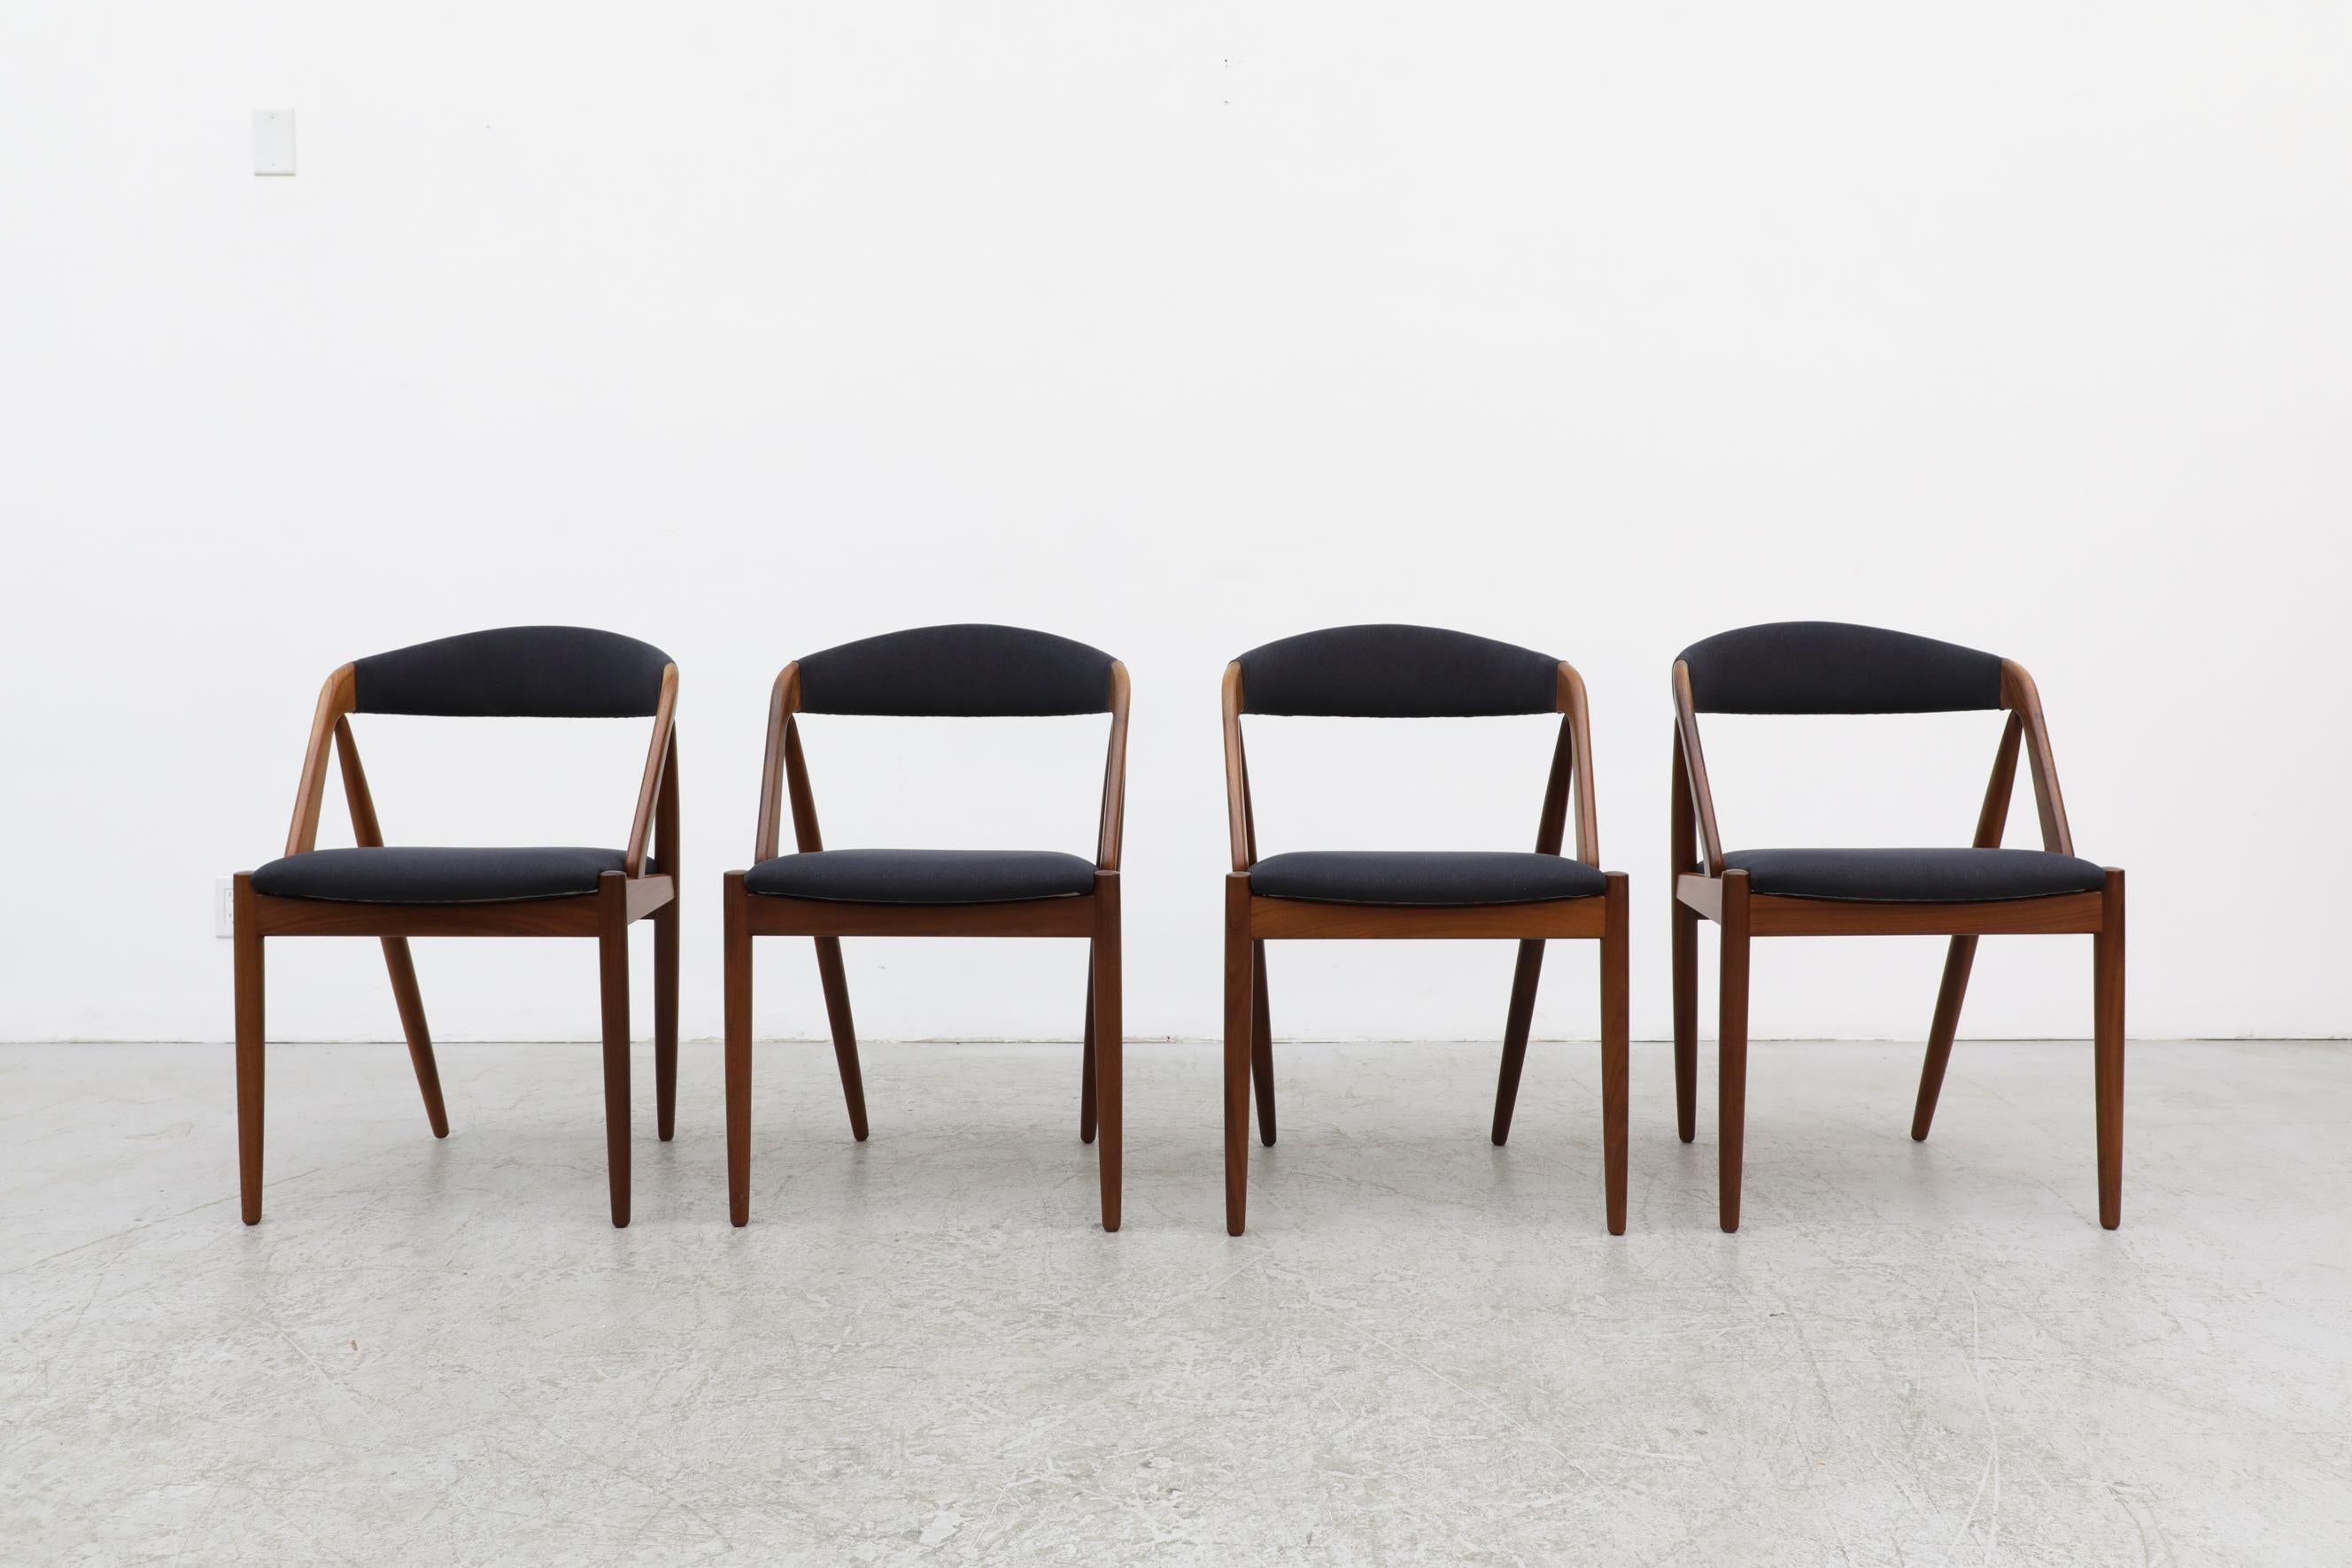 Set of 4 Kai Kristiansen 'Handy' dining chairs. Formerly known as the ‘NV31’ chair, these are in original condition with minimal wear - consistent with their age and use. Upholstered in a navy blue fabric.